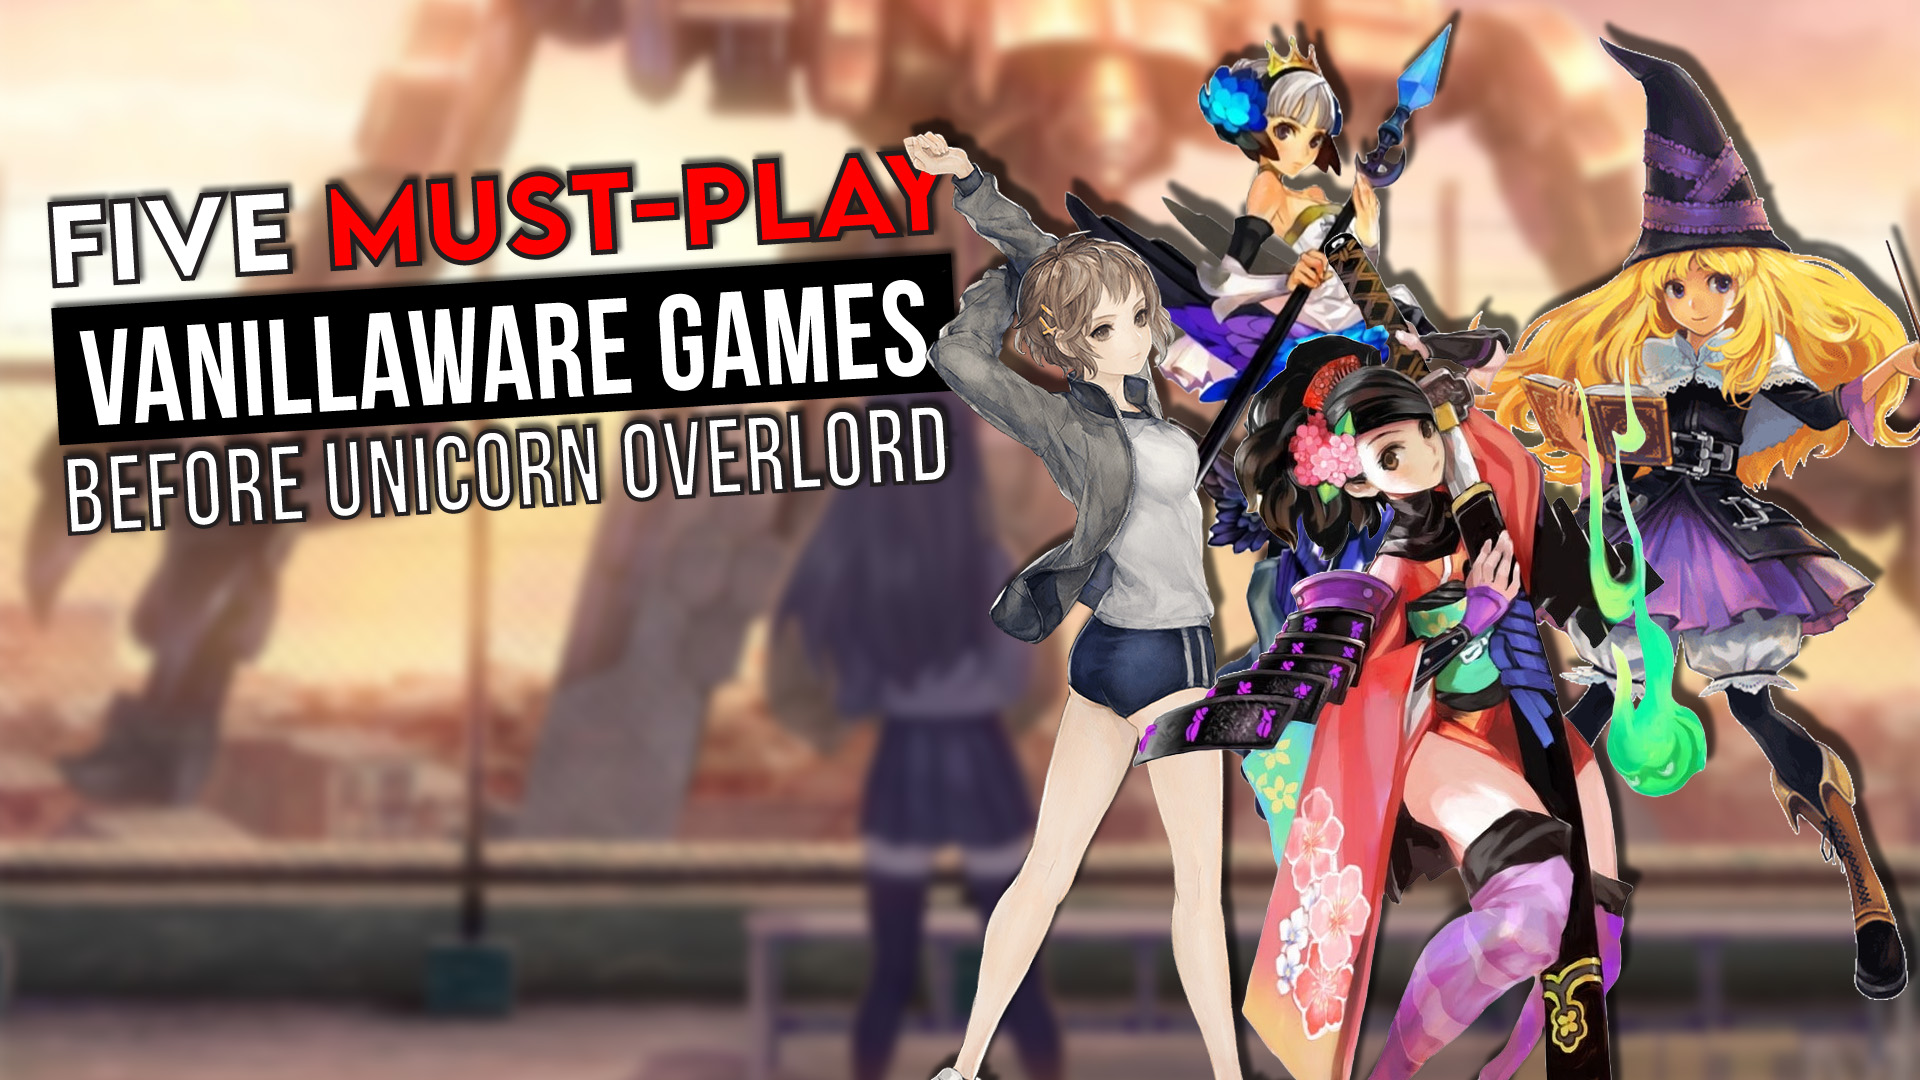 5 Must-Play Vanillaware Games Before Unicorn Overlord Releases